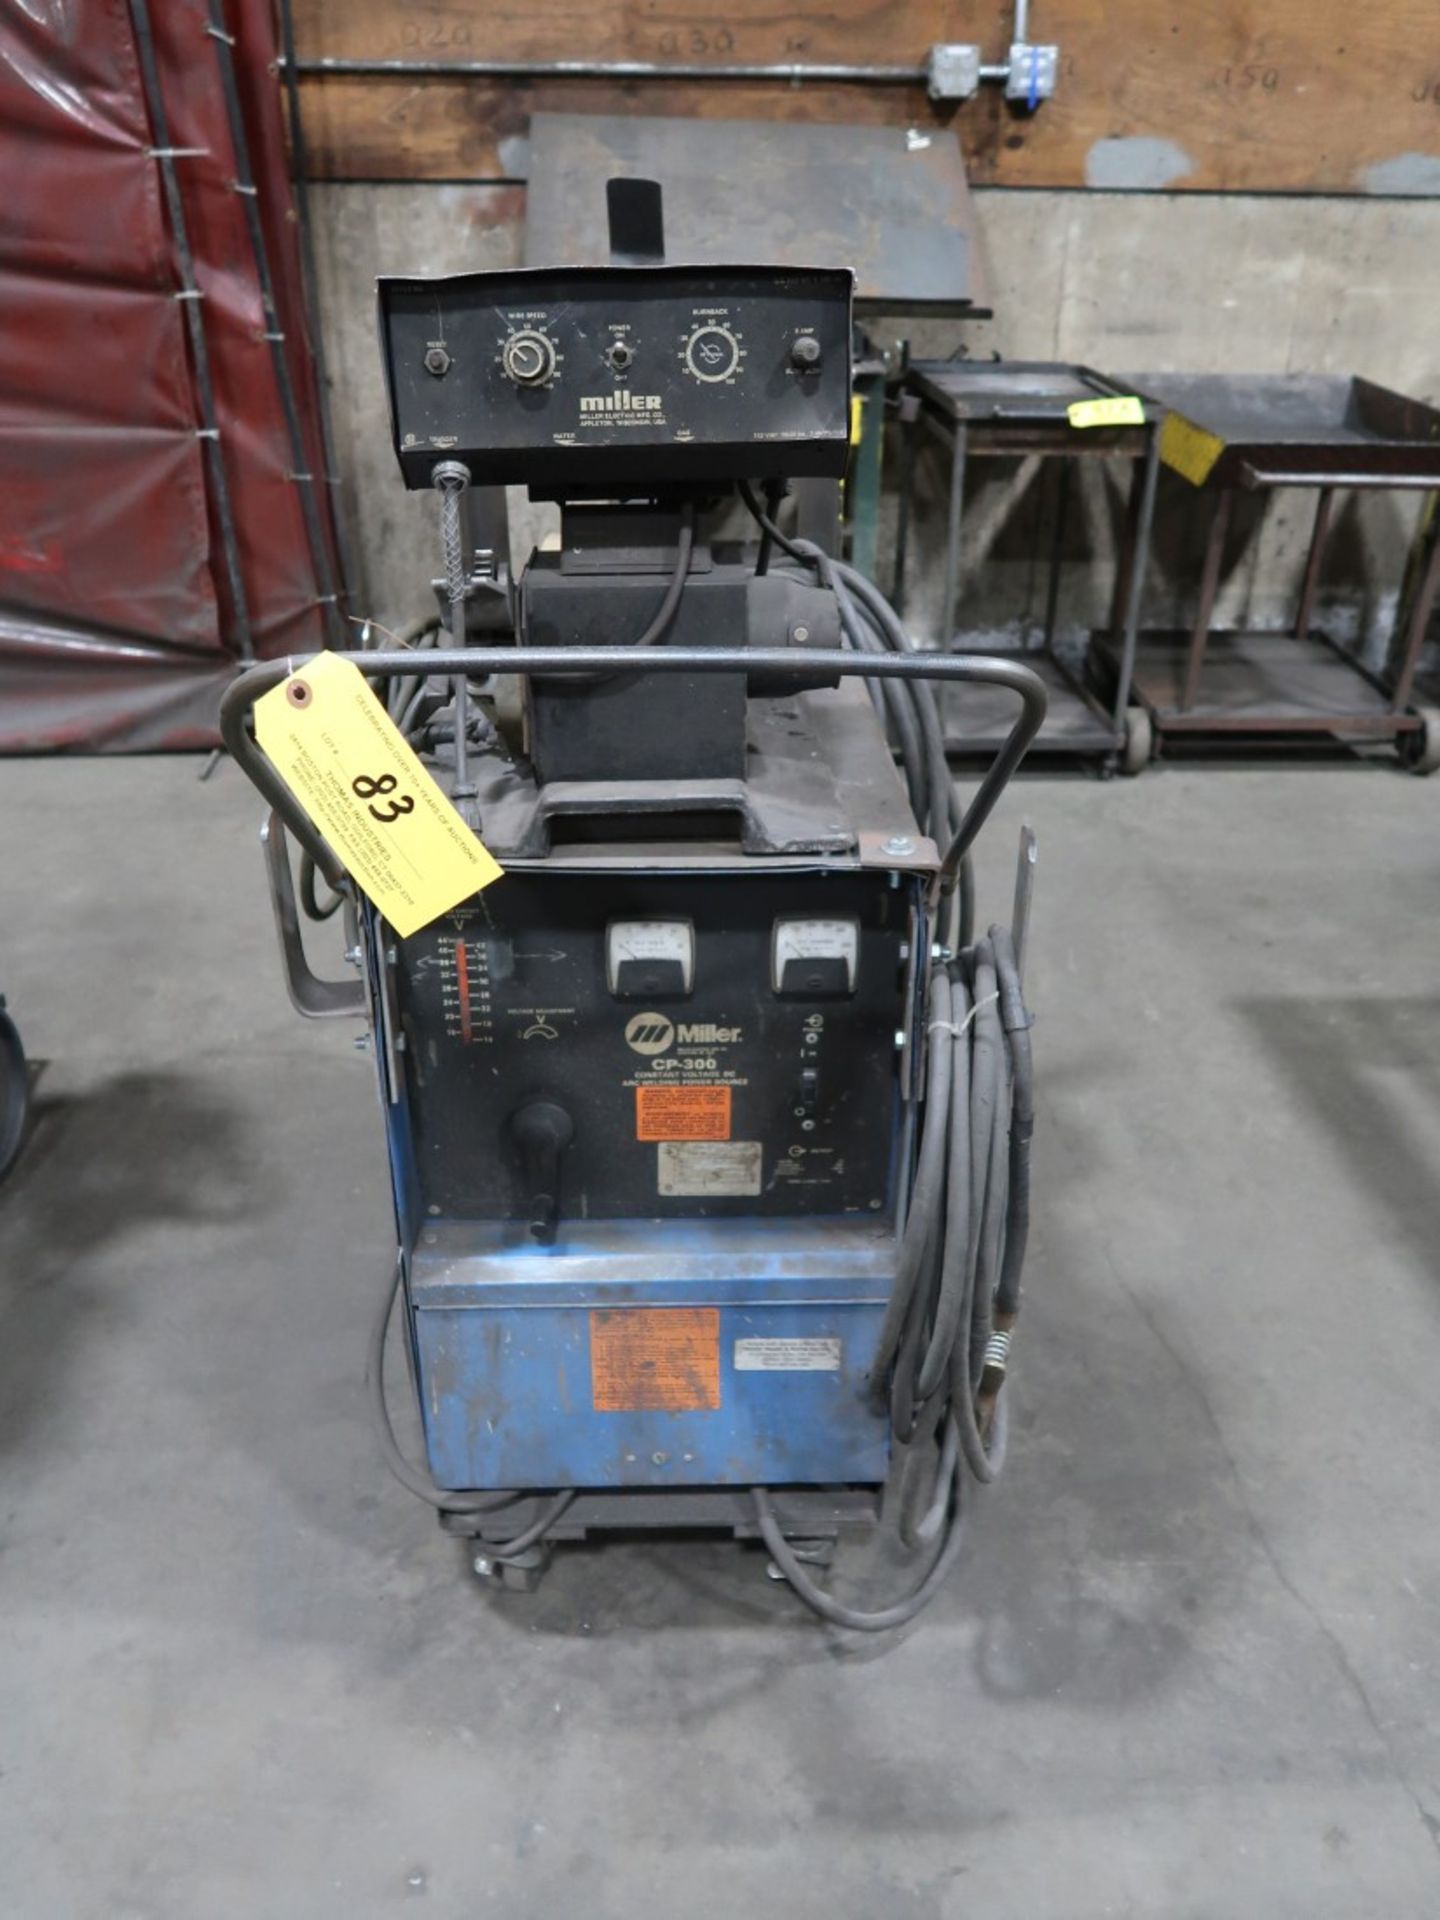 Miller CP-300 DC Arc Welder S/N JH179060 200/230/460 Volts, 38/33/16S Amp w/ Miller Wire Feed - Image 3 of 4